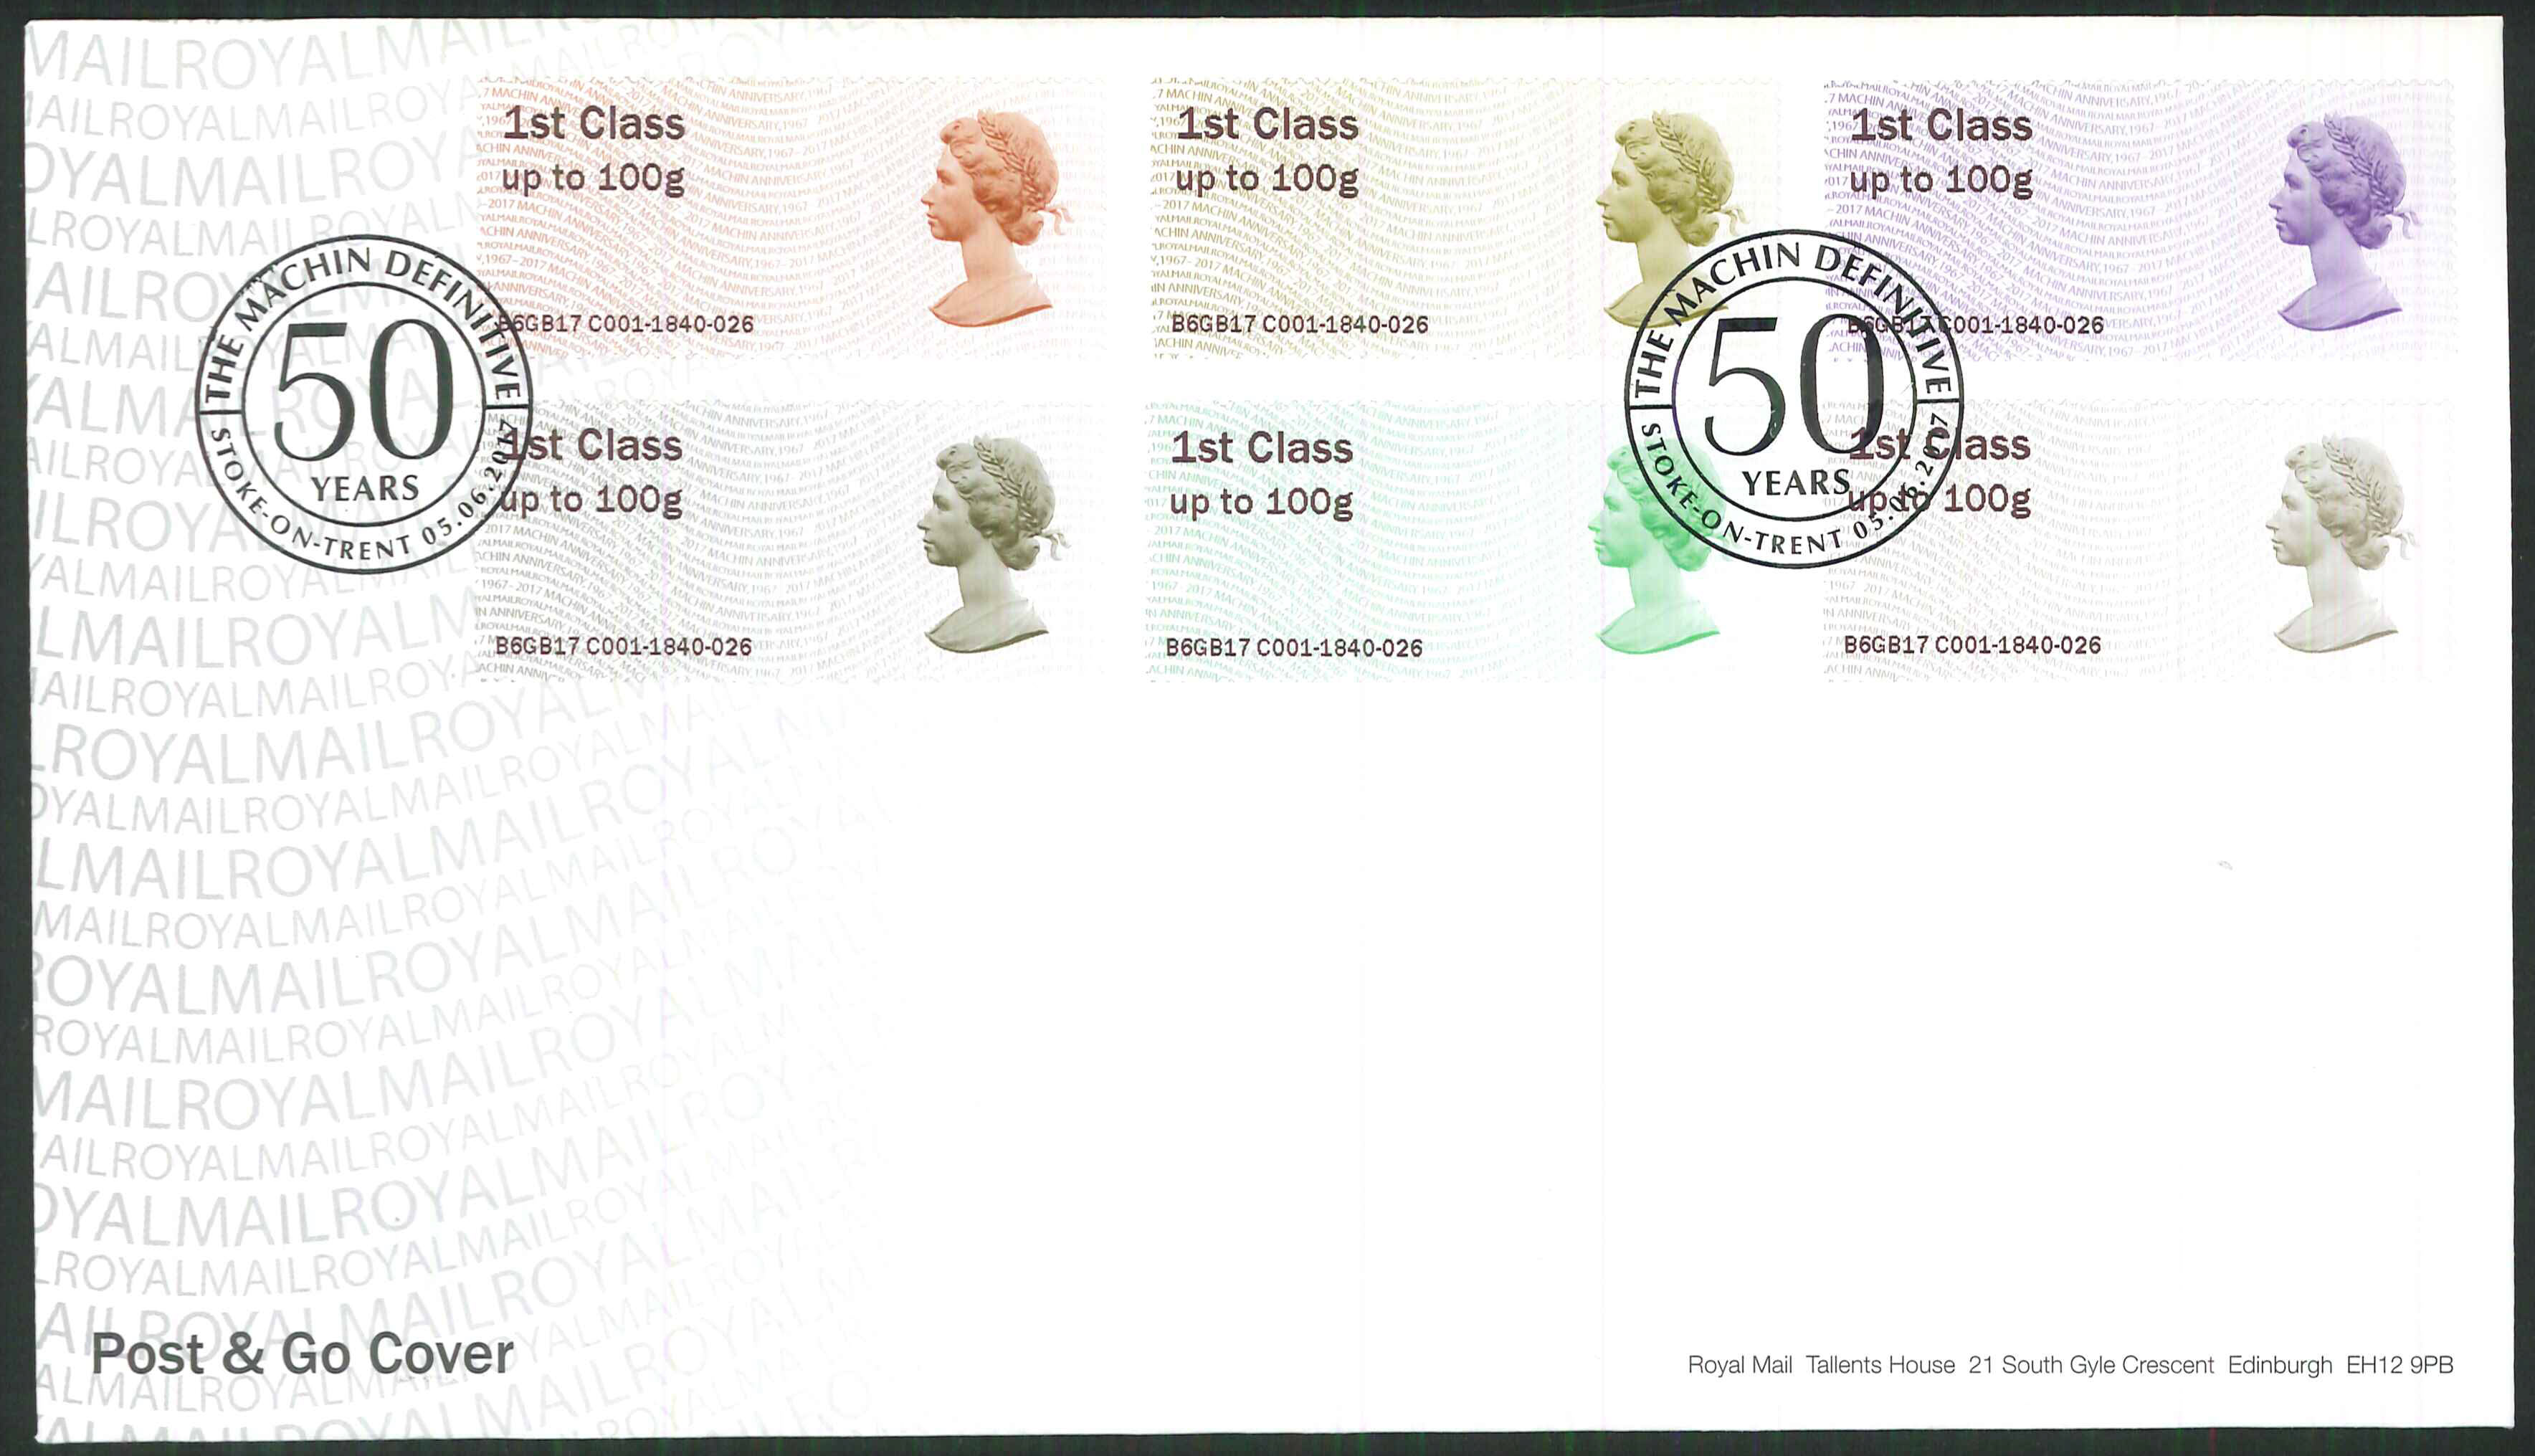 2017 - First Day Cover Machin Post & Go 6 1st 50 years Stoke on Trent Postmark